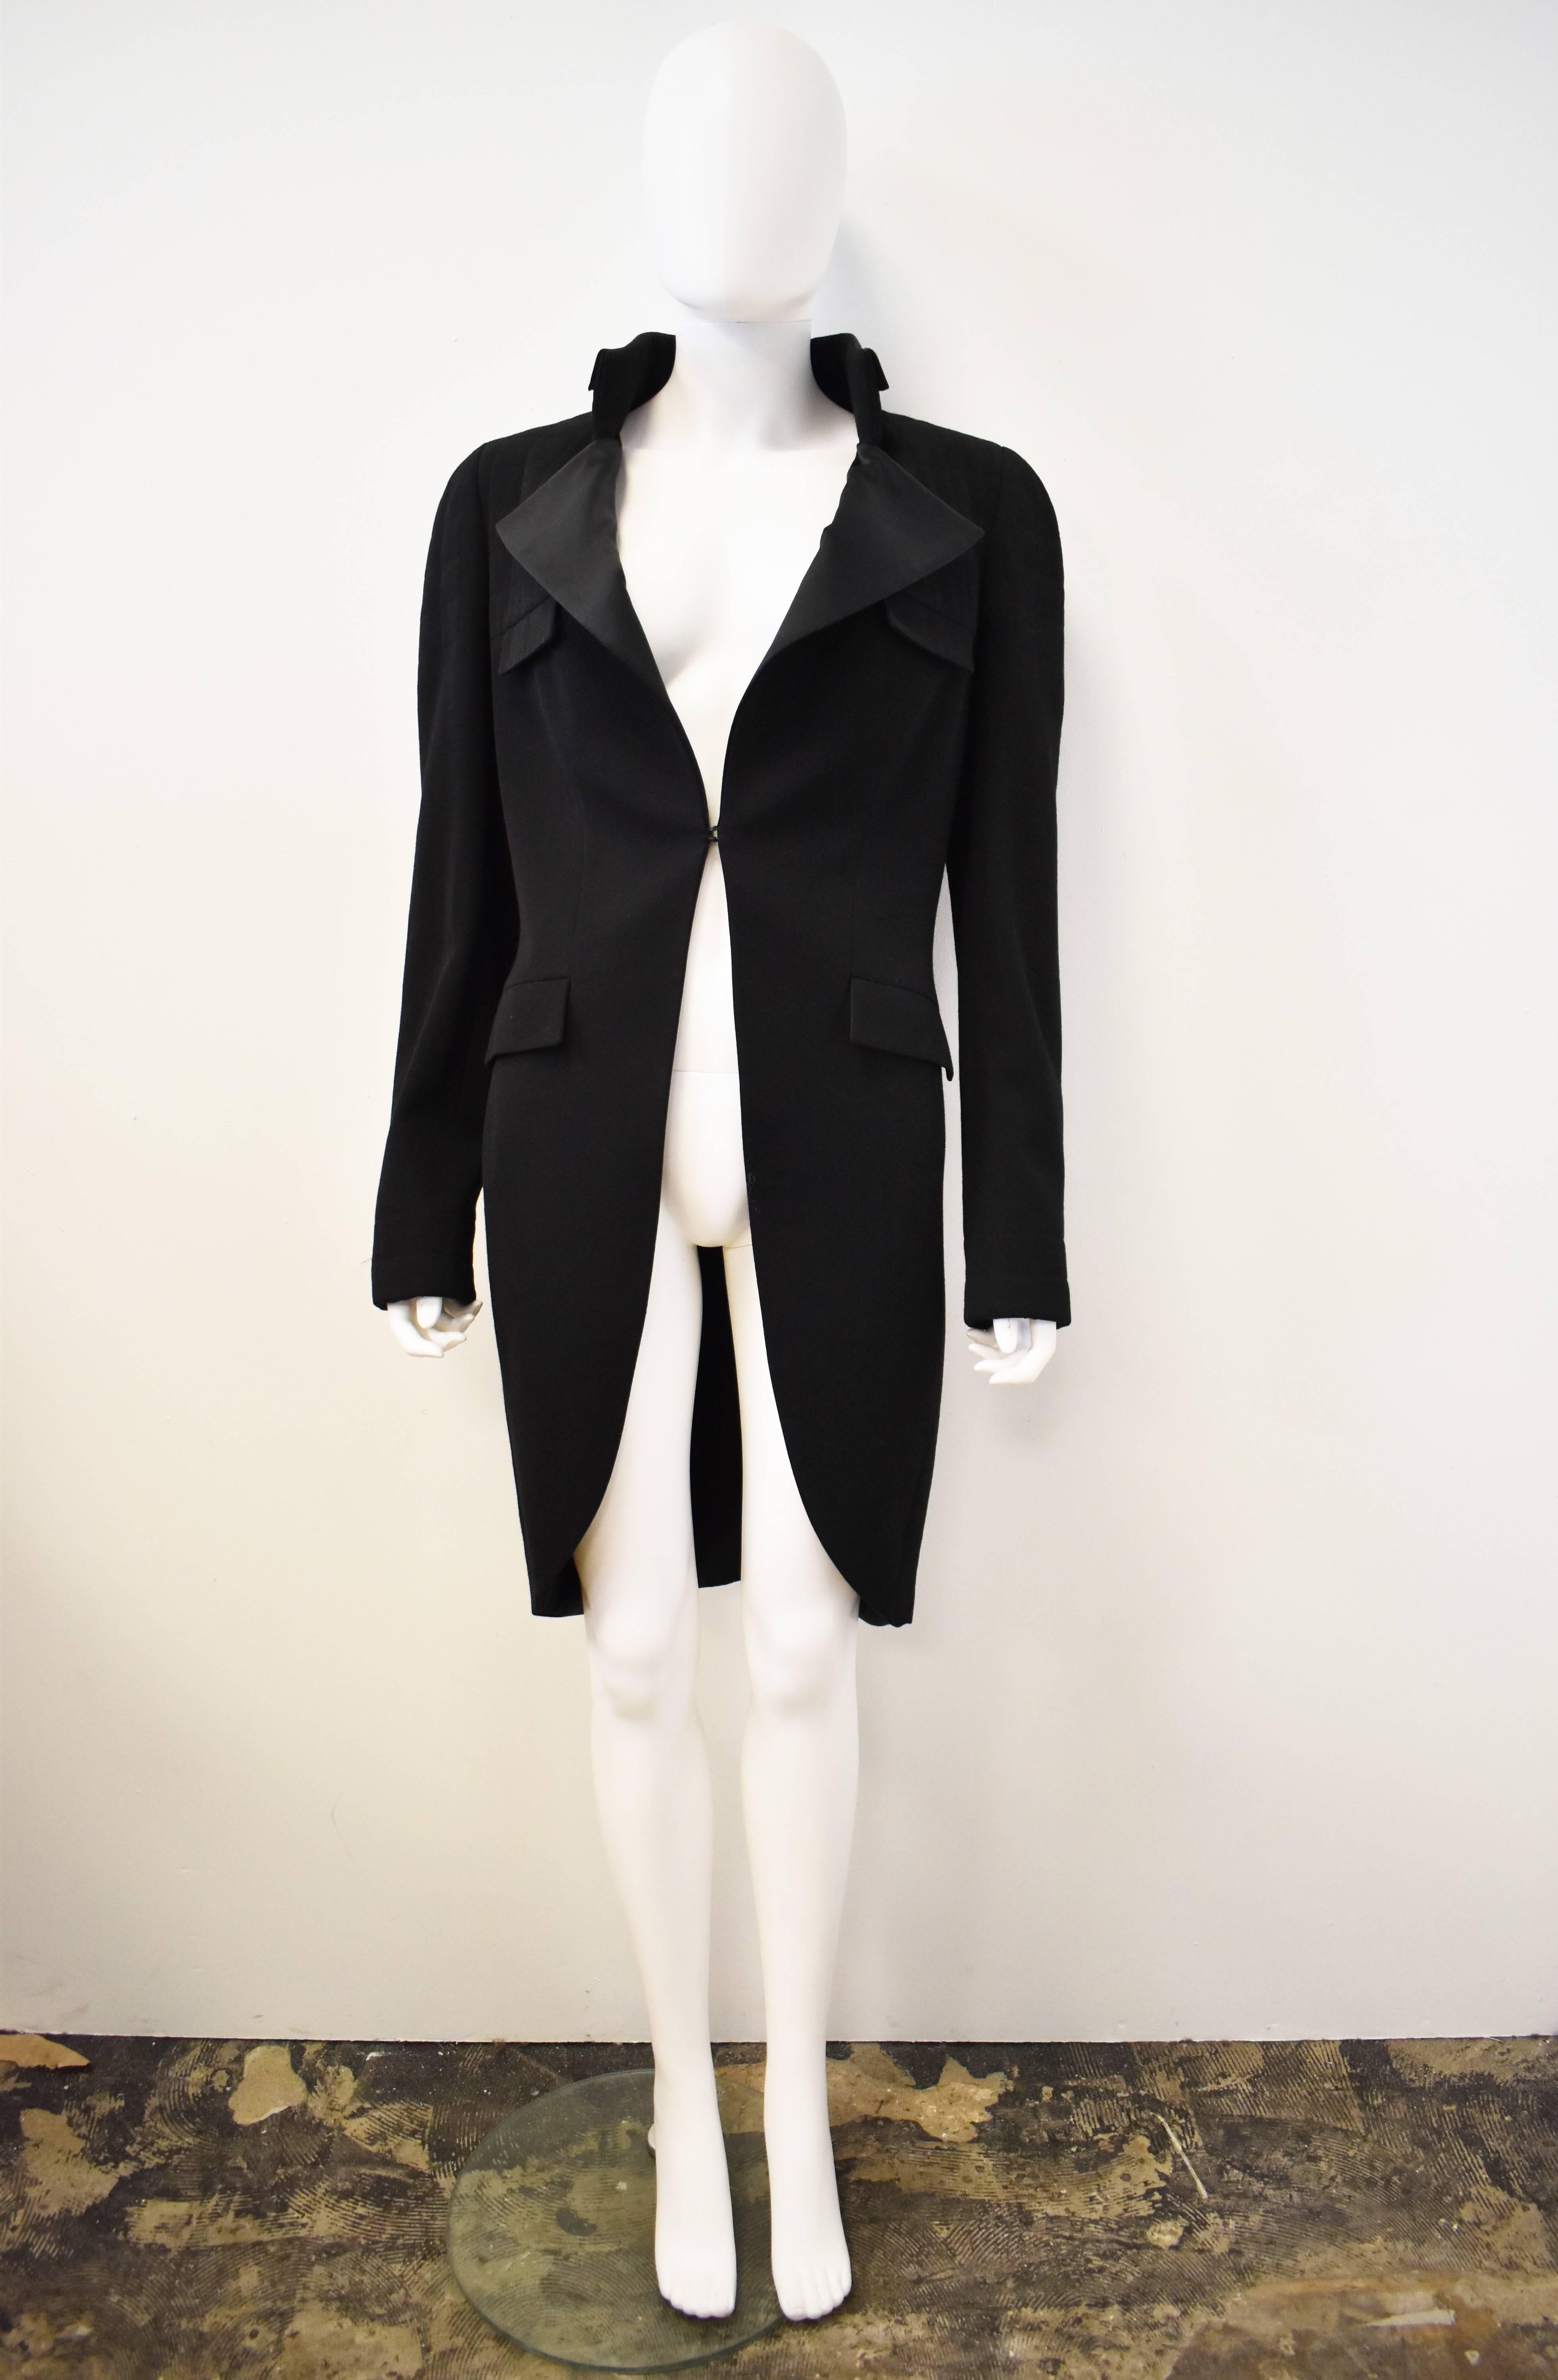 A classic black tuxedo Coat from Chanel’s Autumn Winter 2006 collection. The jacket has a V-neck opening with a small standing collar and triangular lapels. There is a single hook and eye fastening at the waist. The jacket then tapers to a curved